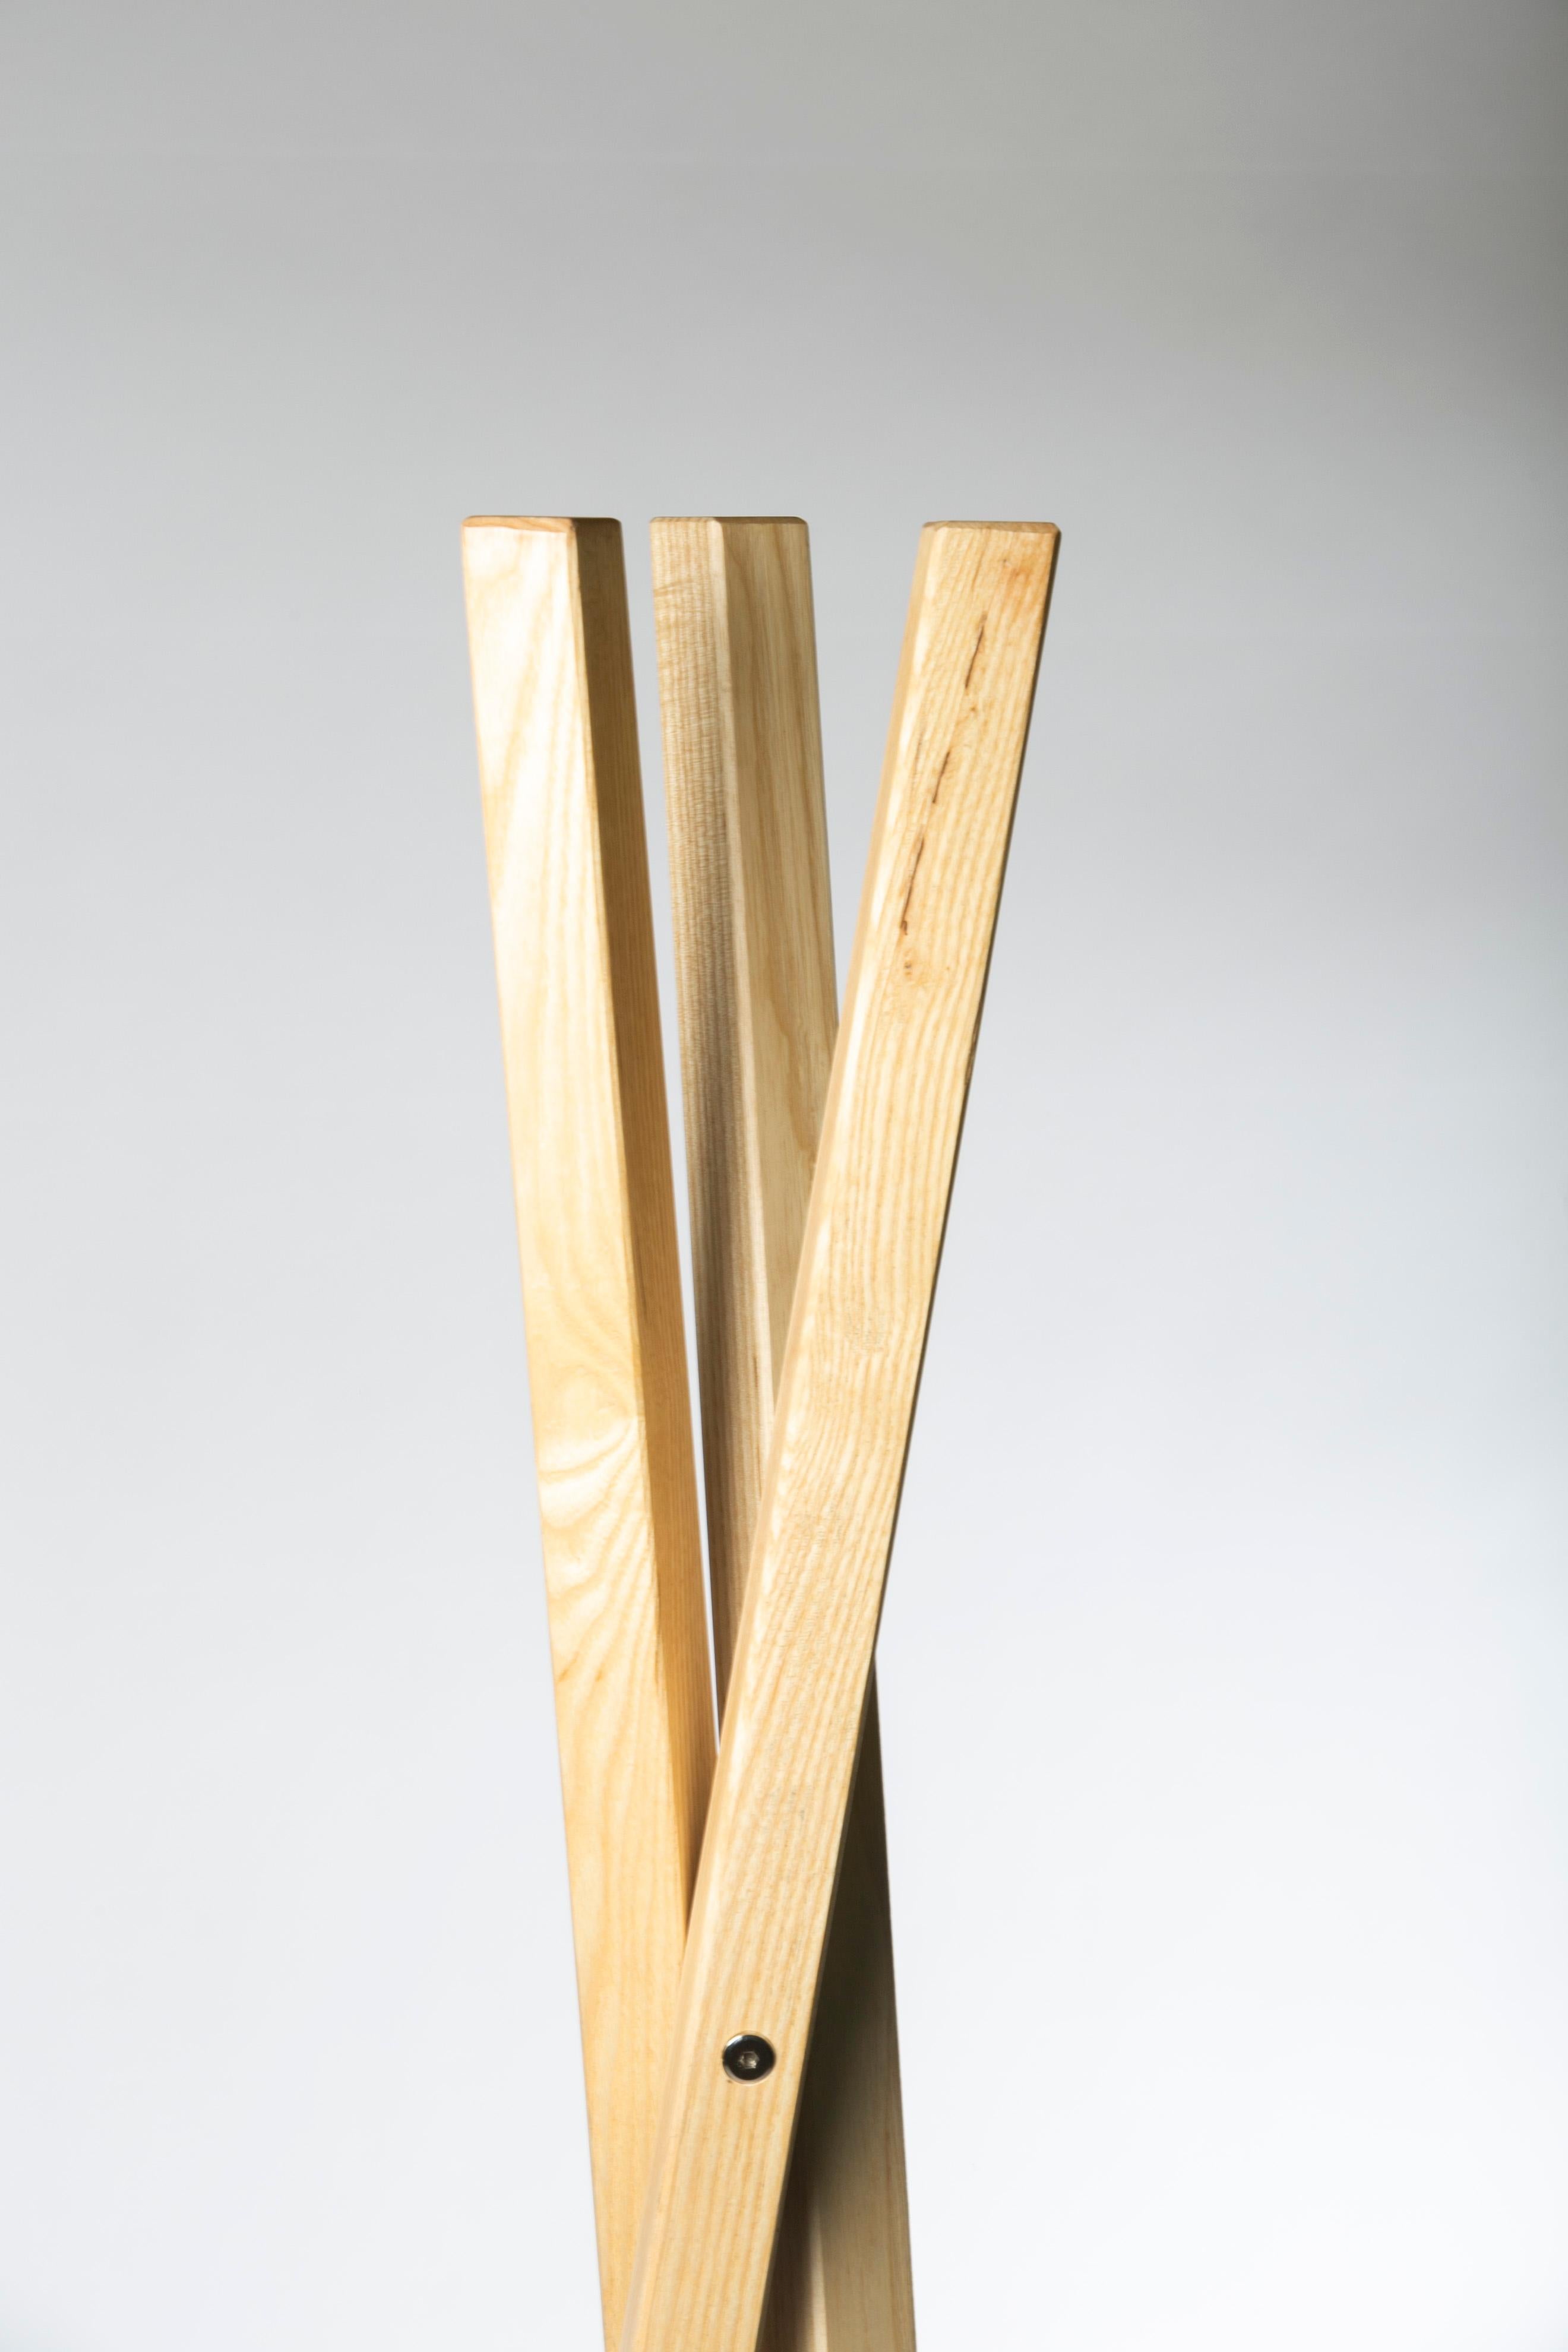 Woodwork Mesones 170, Ash Coat Stand, Contemporary Mexican Design by Juskani Alonso For Sale